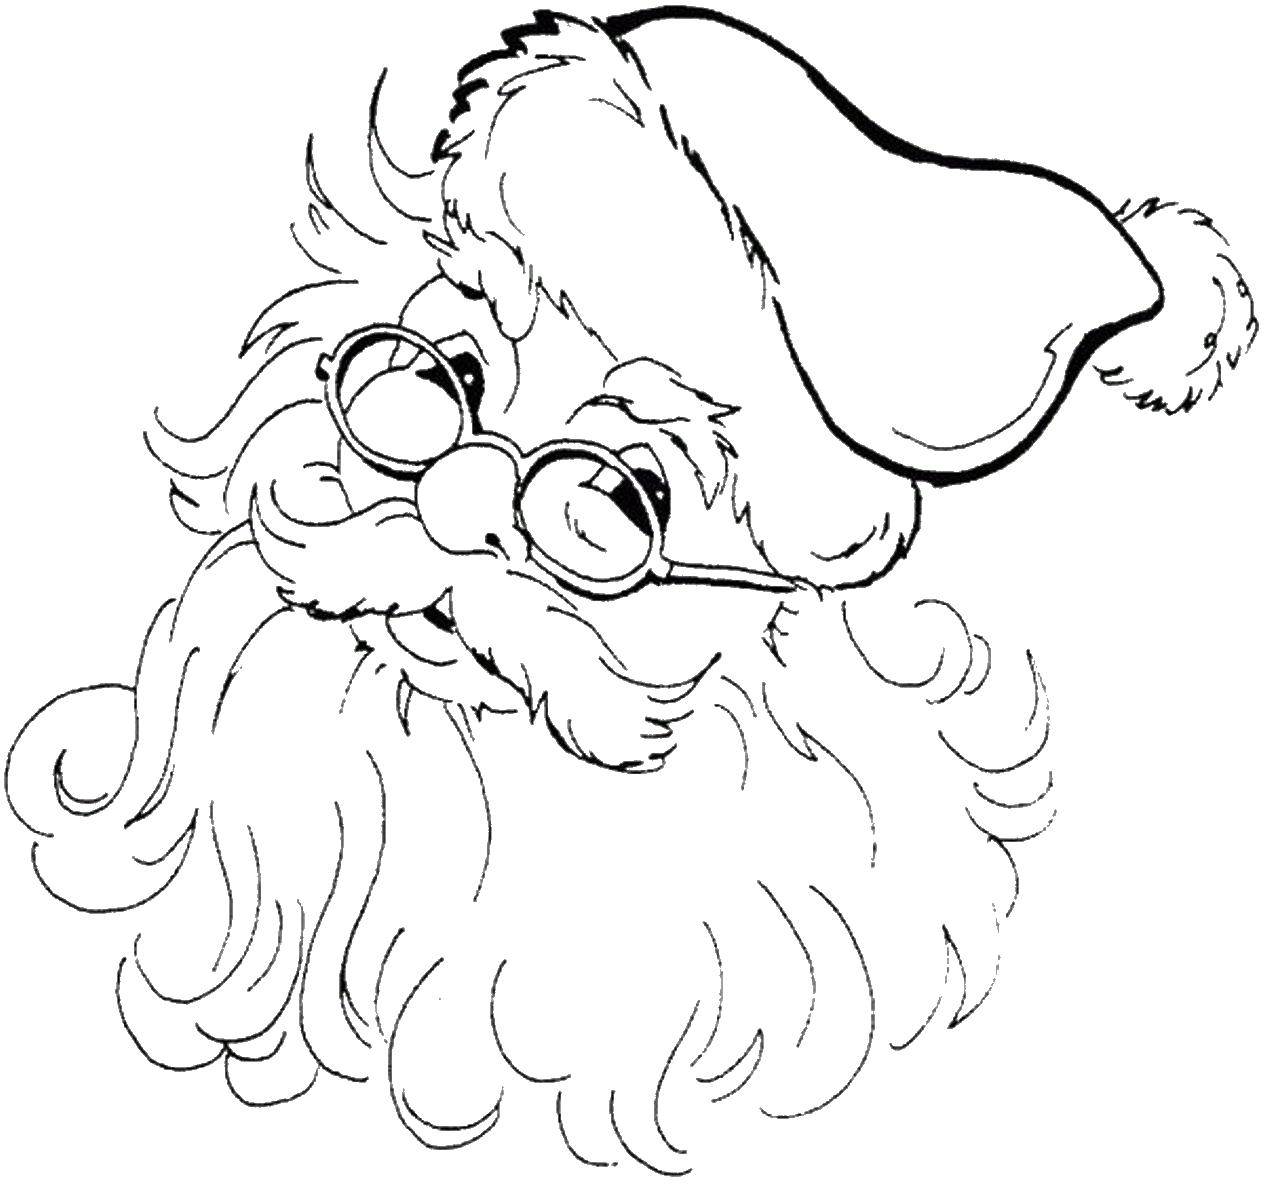 Coloring Santa Claus with glasses. Category Christmas. Tags:  beard, glasses, grandfather.